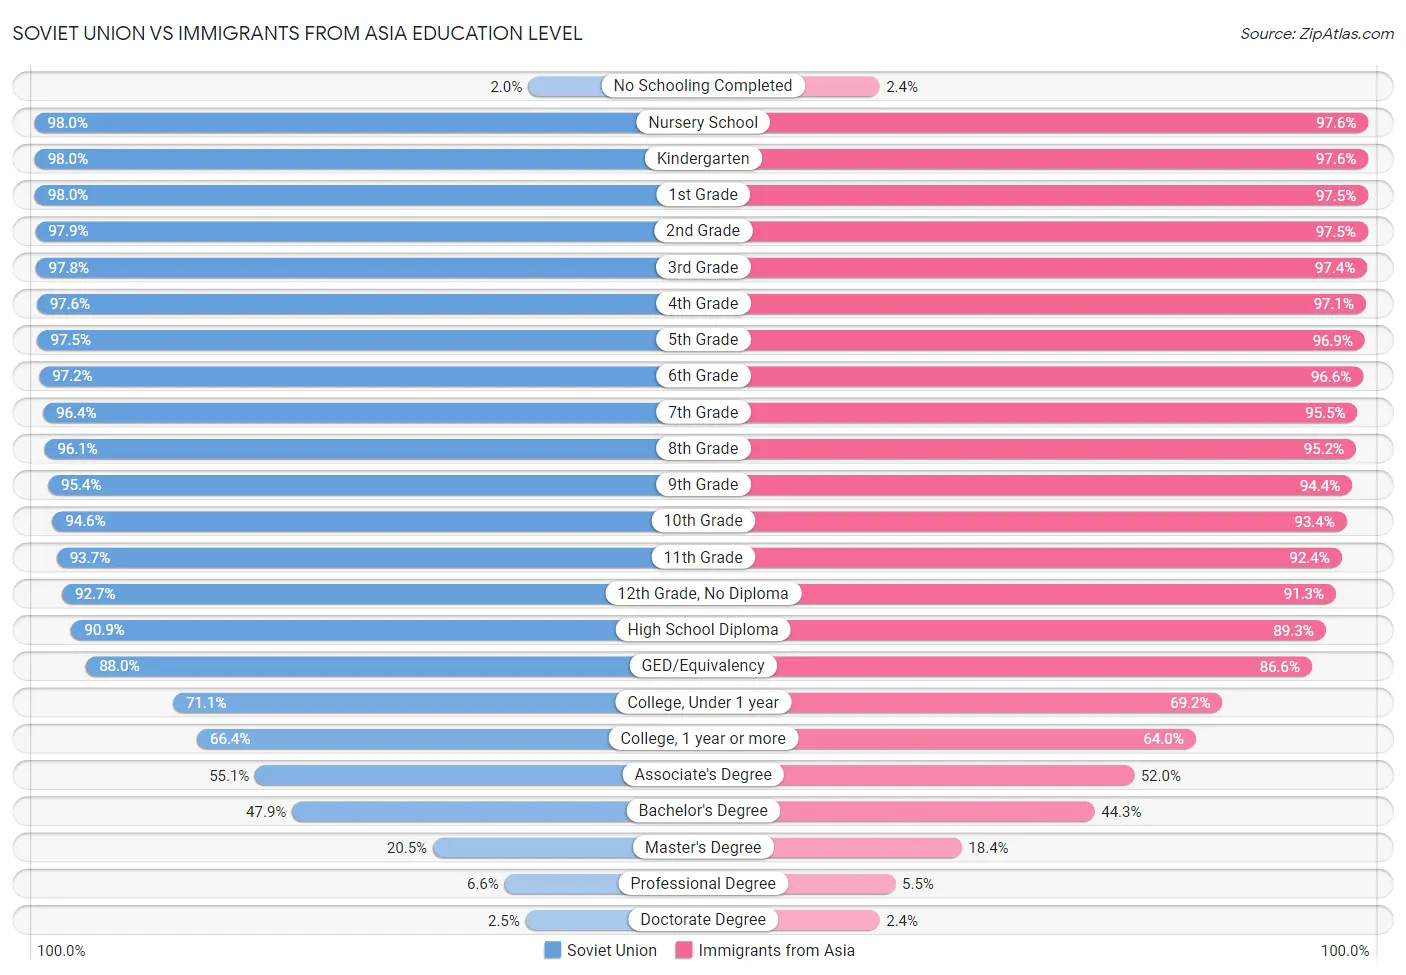 Soviet Union vs Immigrants from Asia Education Level